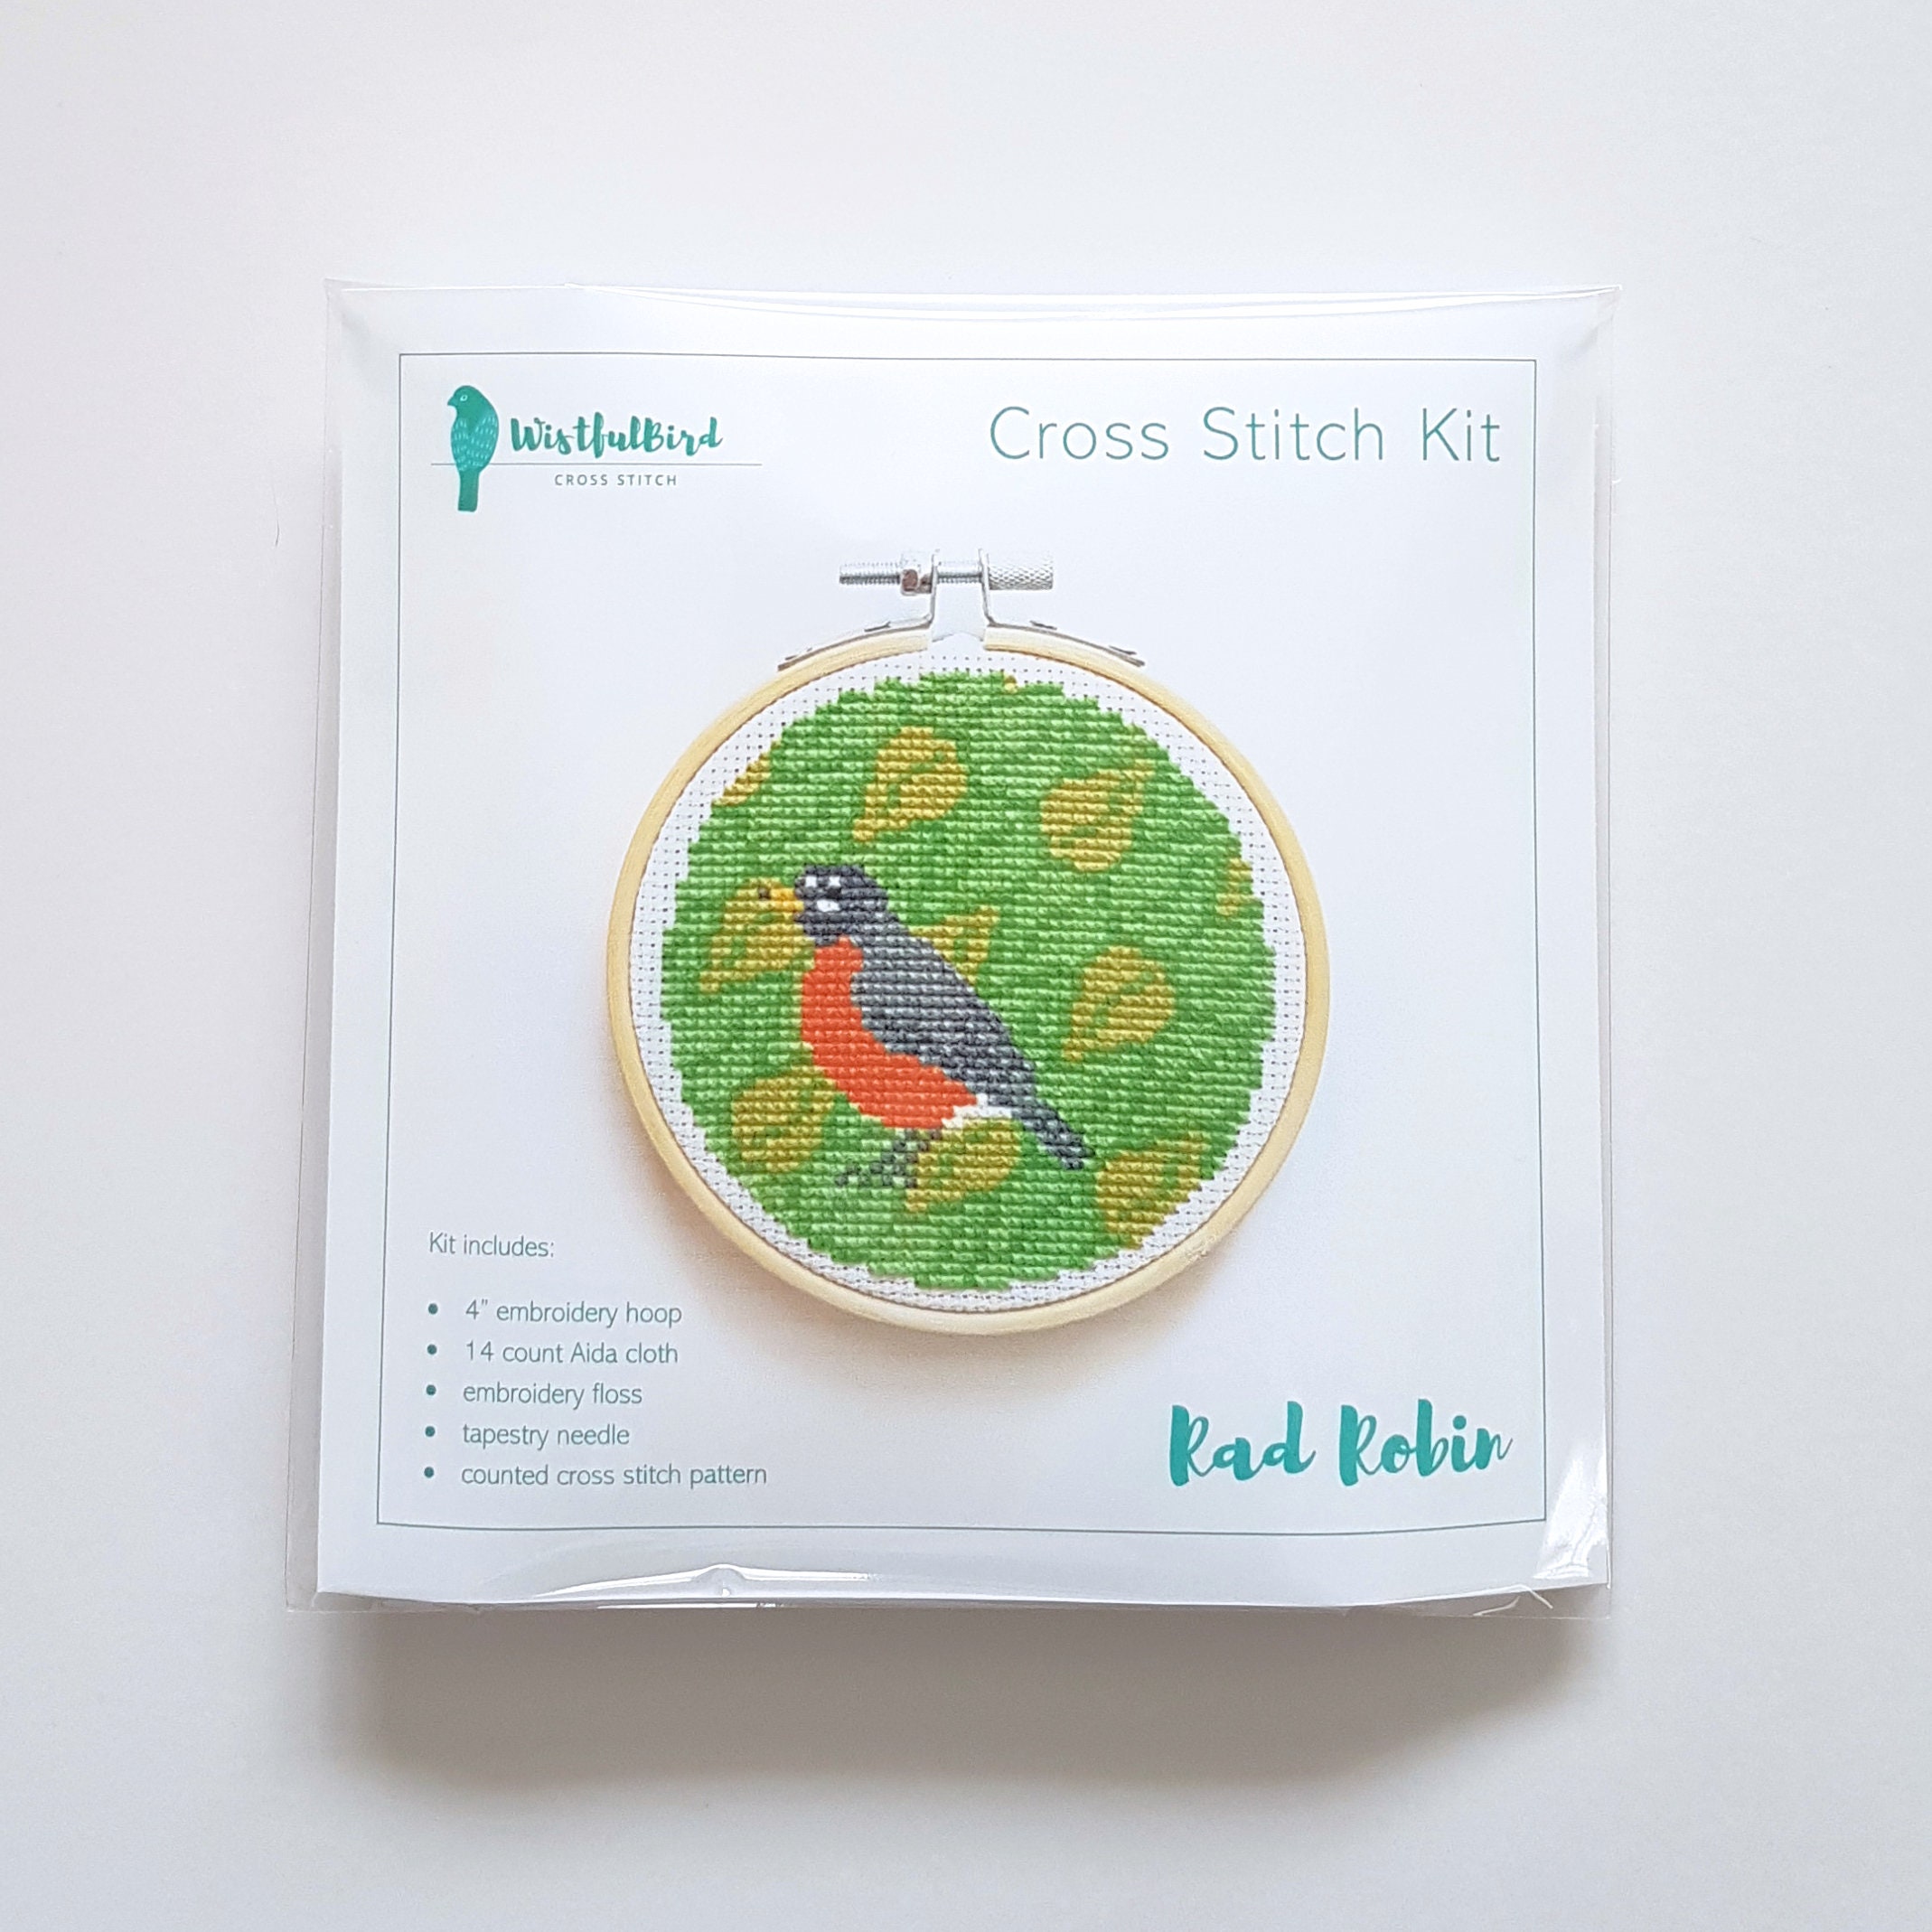 Kraftex Cross Stitch Kits: Stamped Cross Stitch Kits for Beginners. [2  Embroidery Hoop] Simple and Easy Beginner Cross Stitch Kits for Adults and